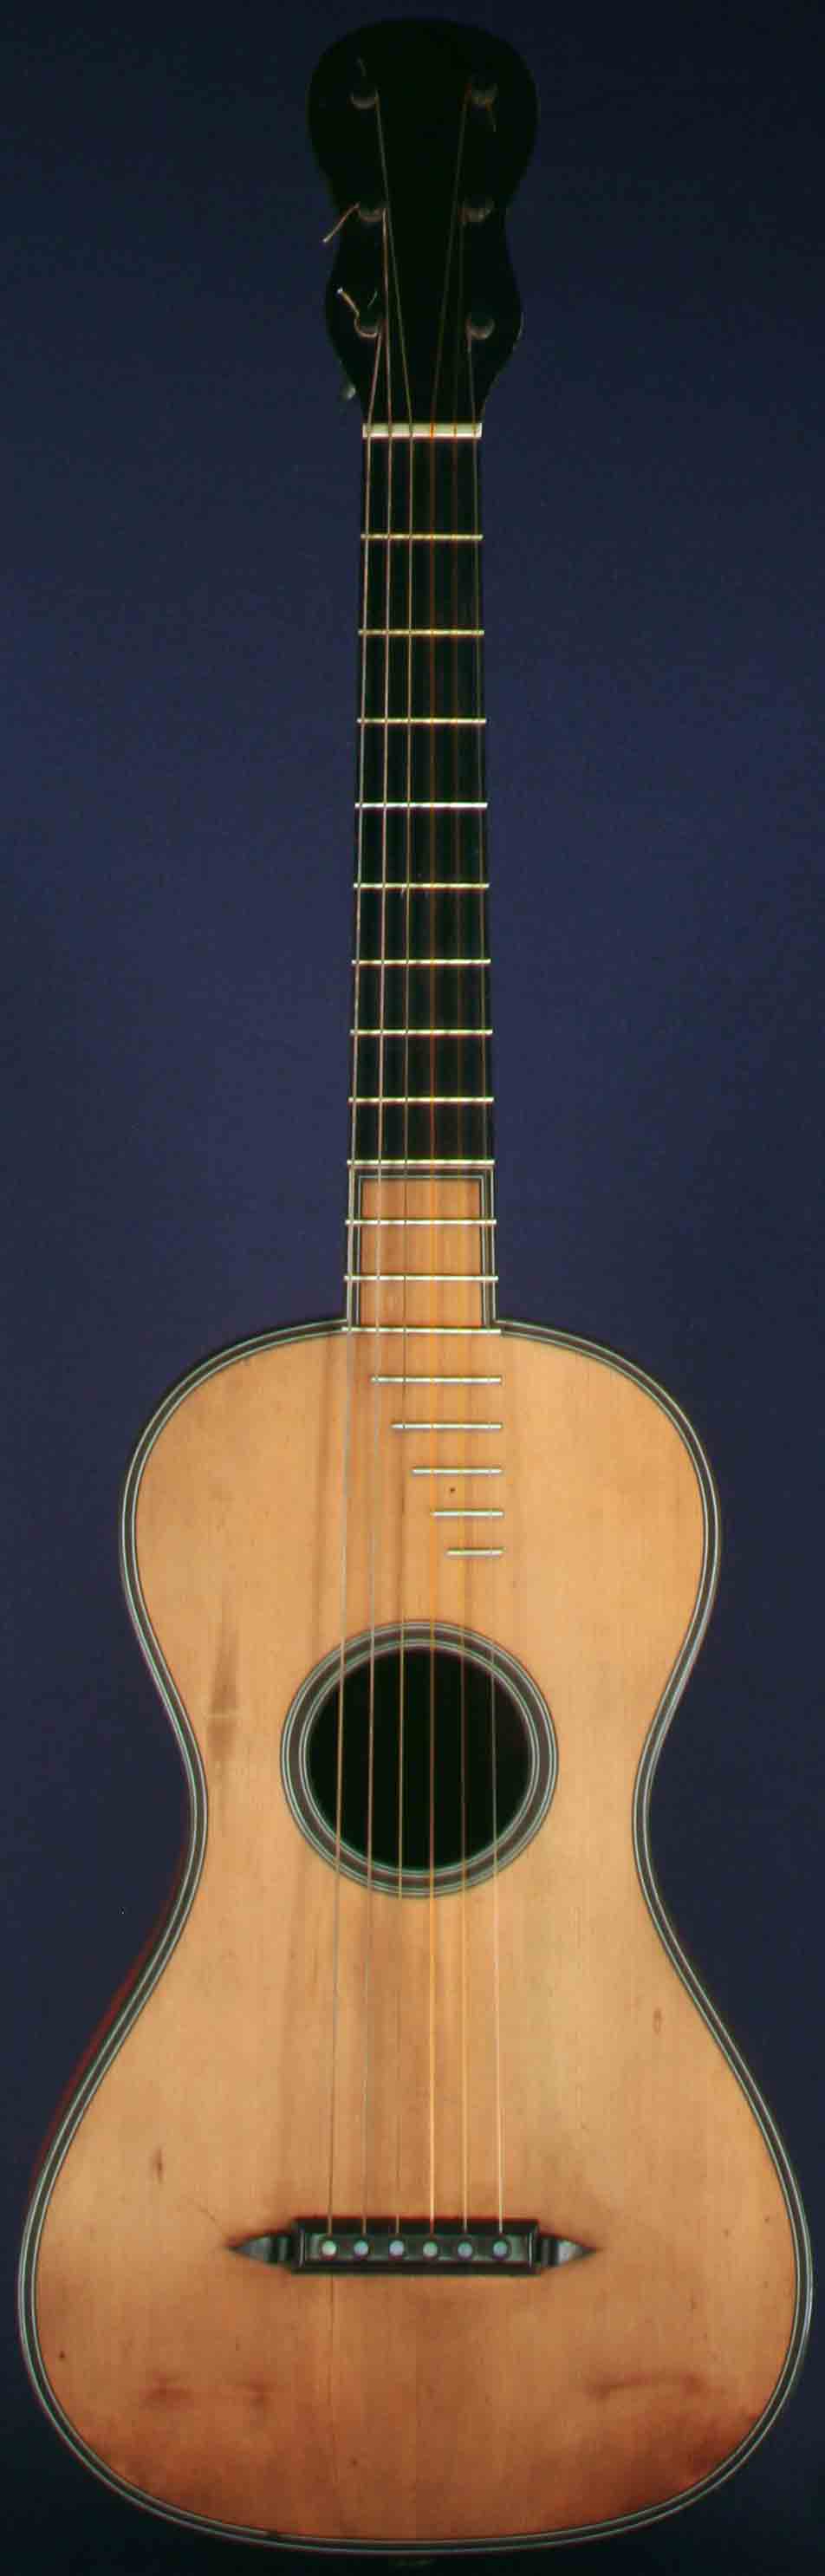 Early Musical Instruments part of the Bruderlin Collection, antique Romantic Guitar by Franois Breton around 1810